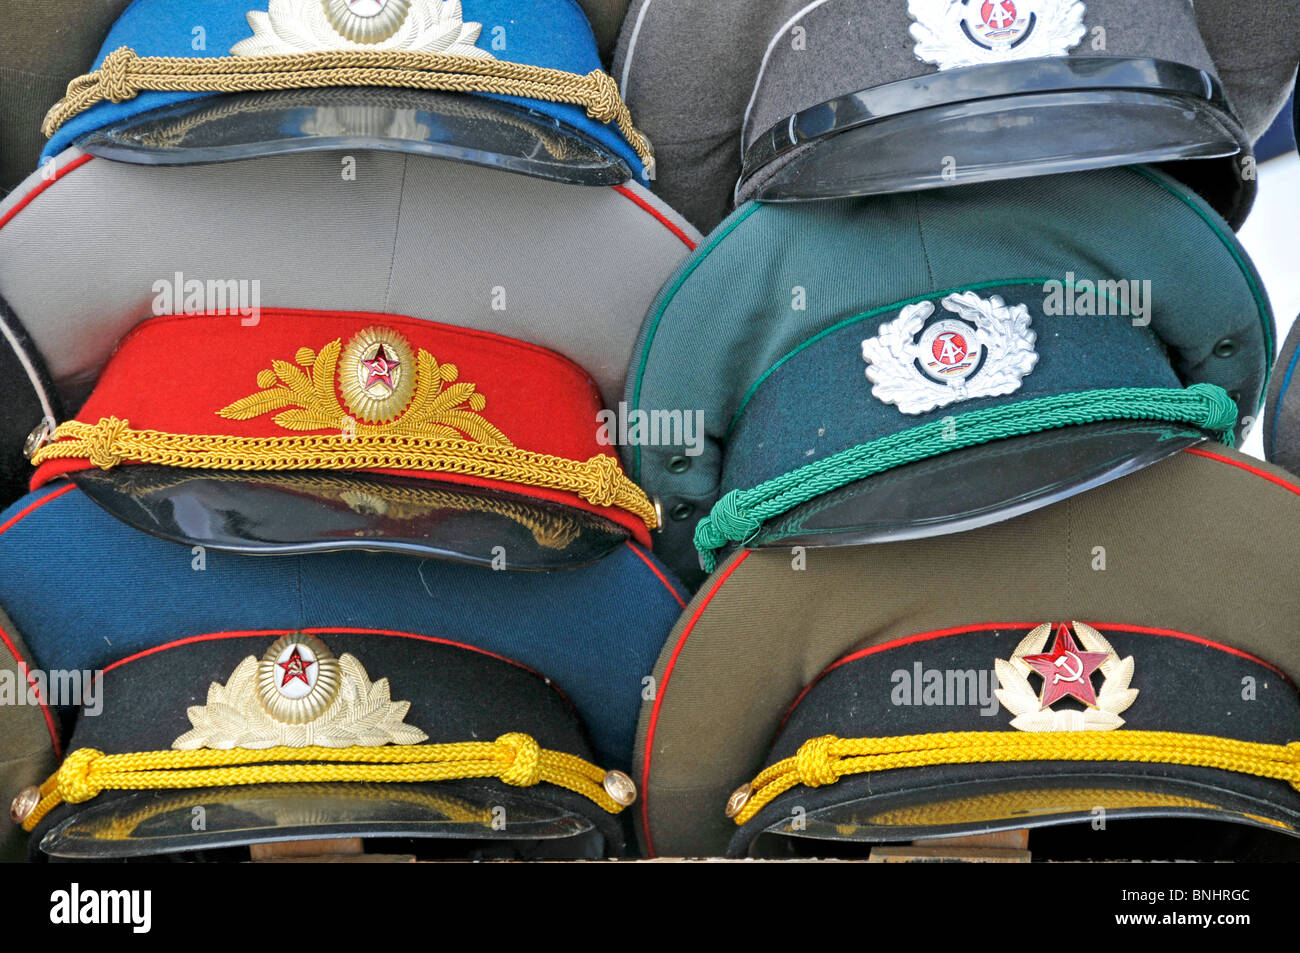 Peaked cap Caps Soviet DDR GDR Military Nostalgia Army Uniform Uniforms Souvenirs Checkpoint Charlie Berlin city Germany Europe Stock Photo